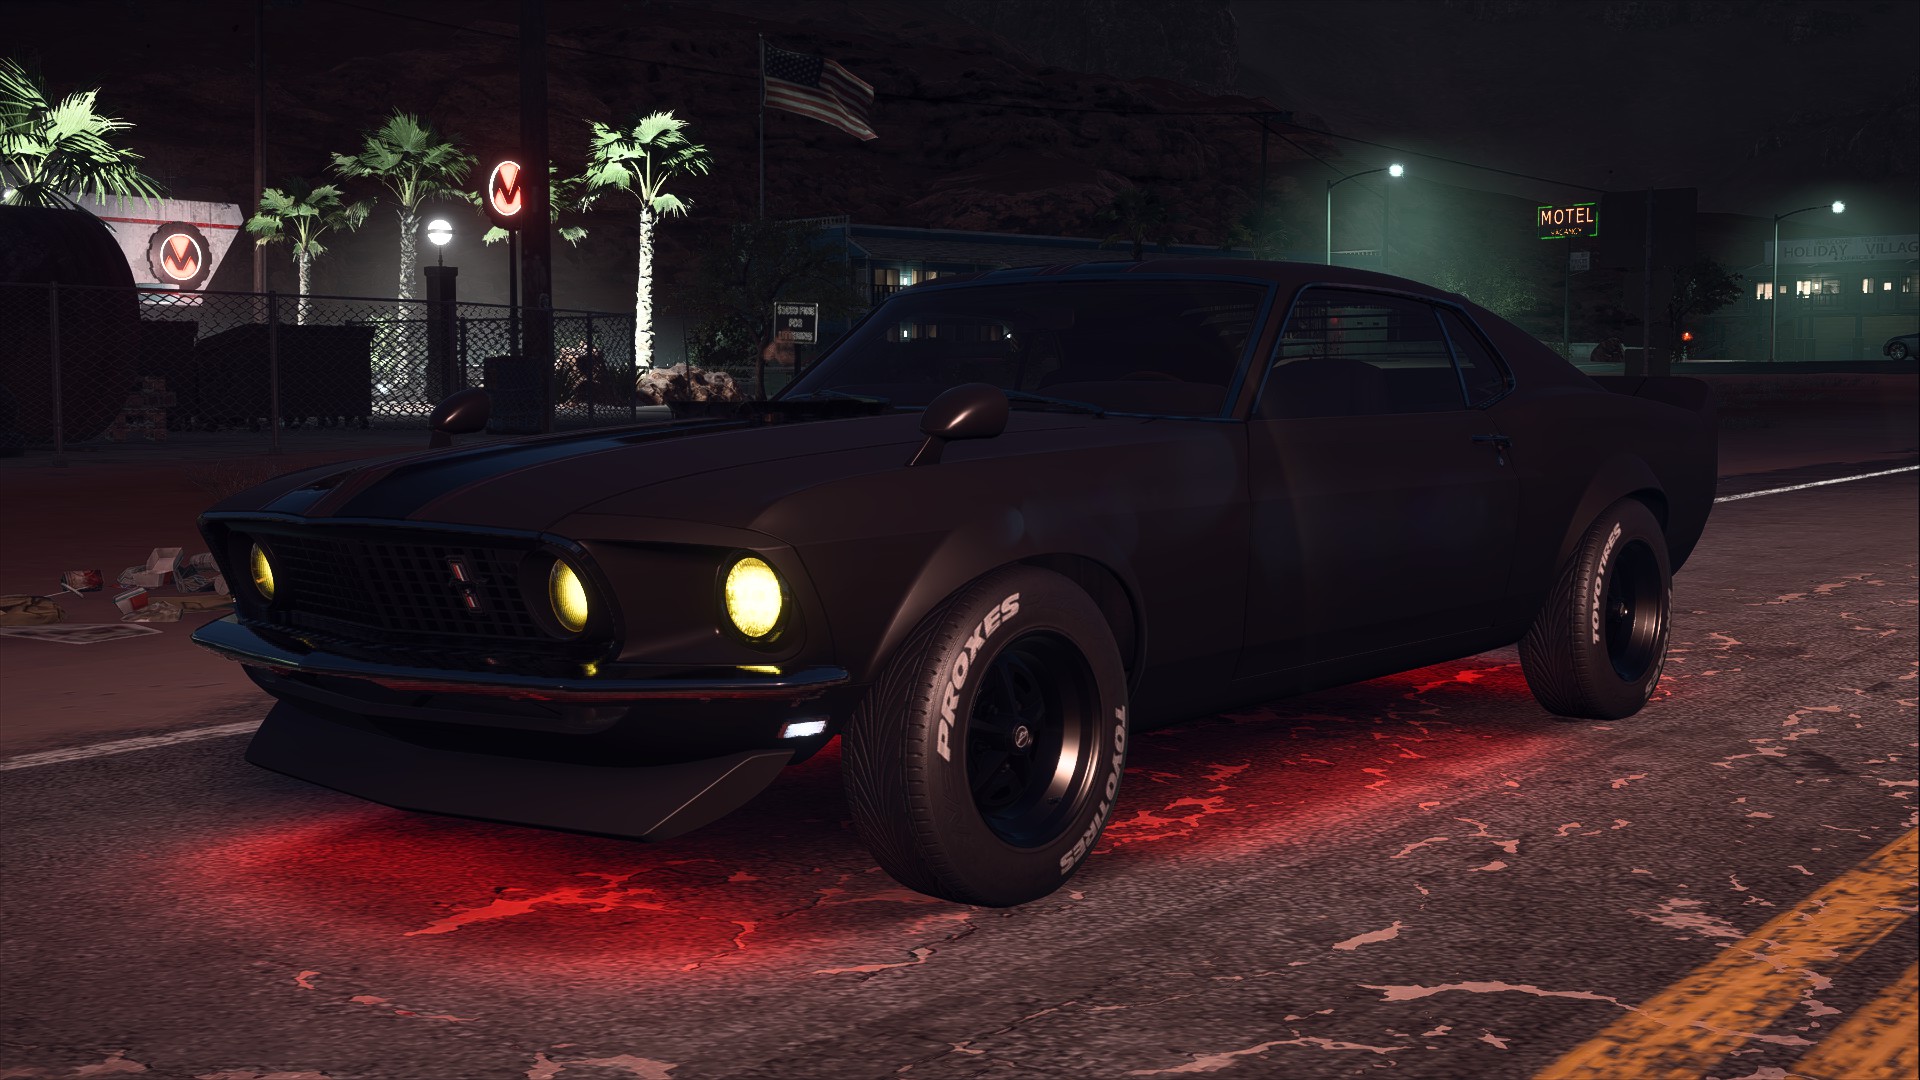 Need For Speed Payback Mustang Boss 302 Car Video Game Art 1920x1080